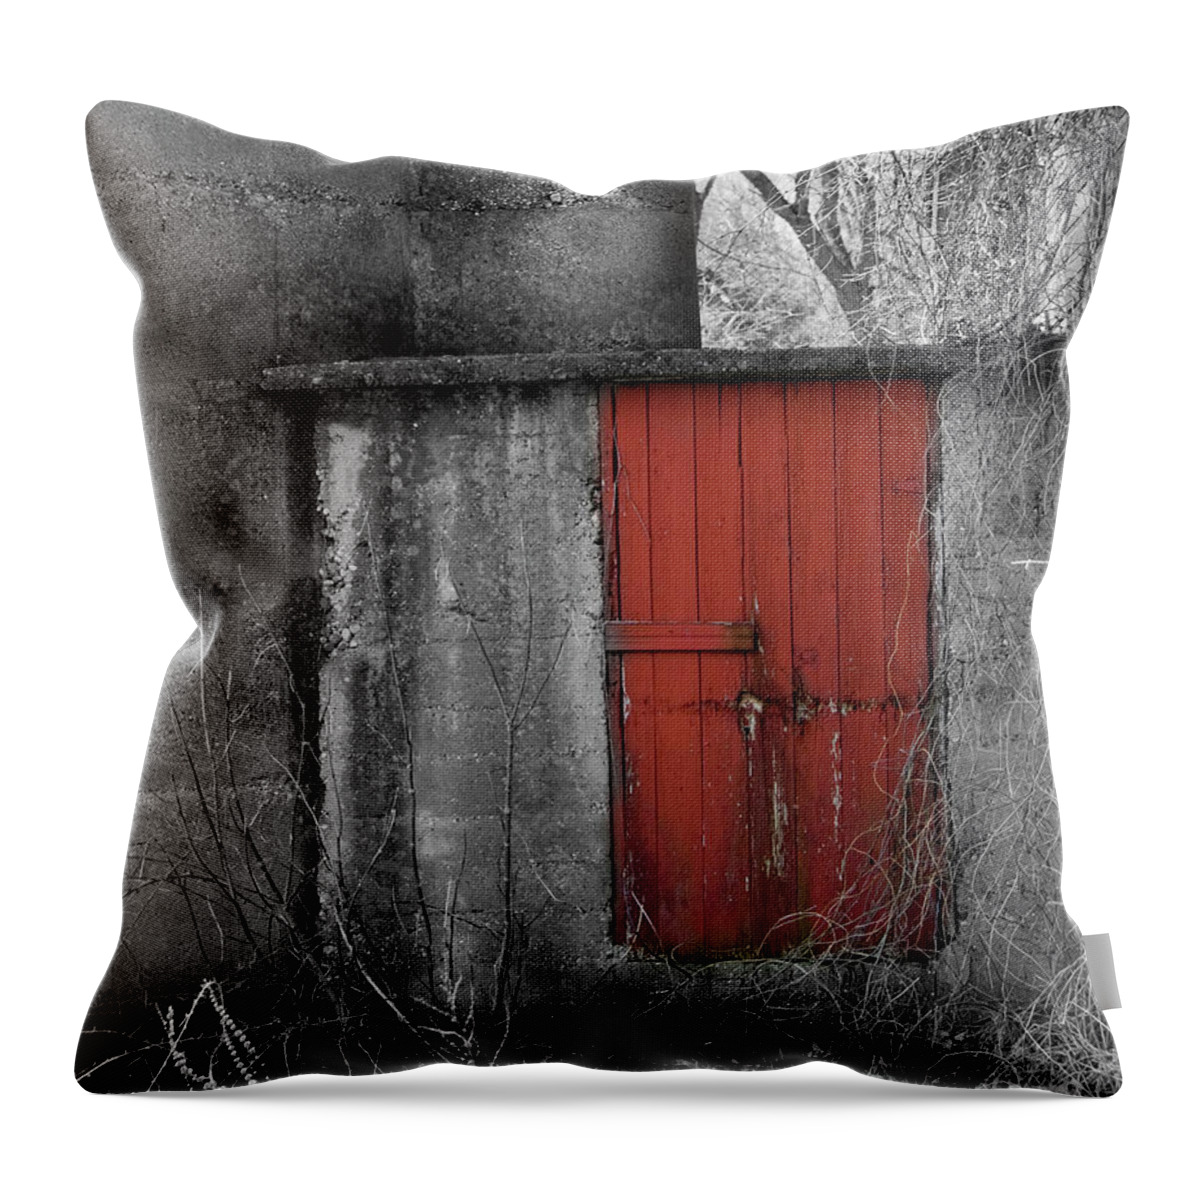 Abandoned Throw Pillow featuring the photograph The Red Door by Billy Knight